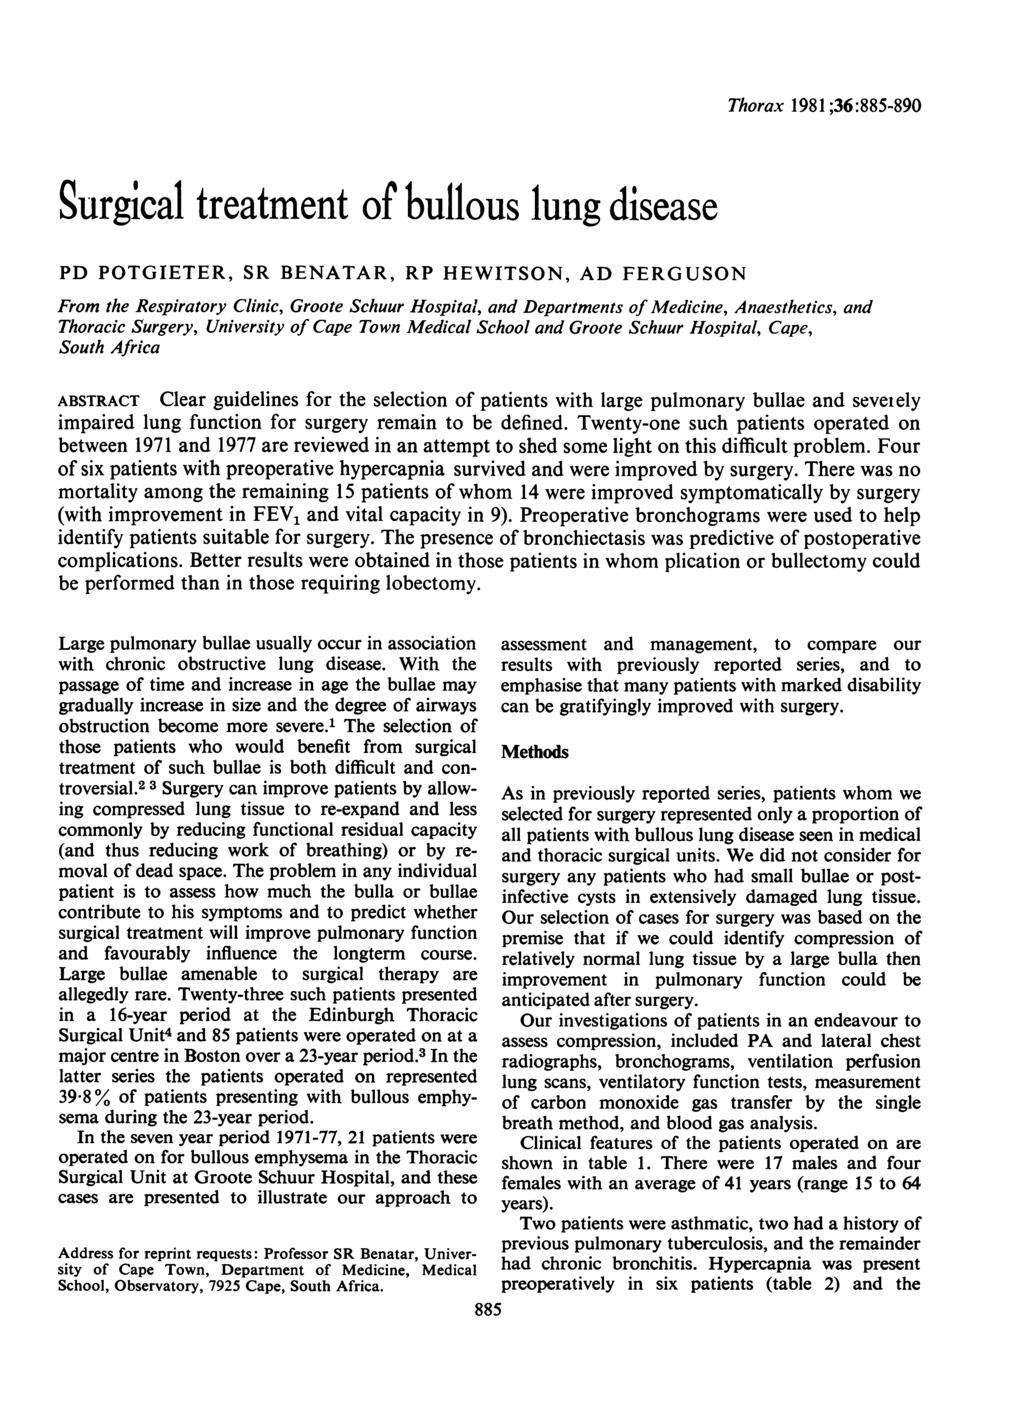 Surgical treatment of bullous lung disease PD POTGIETER, SR BENATAR, RP HEWITSON, AD FERGUSON Thorax 1981 ;36:885-890 From the Respiratory Clinic, Groote Schuur Hospita', and Departments of Medicine,